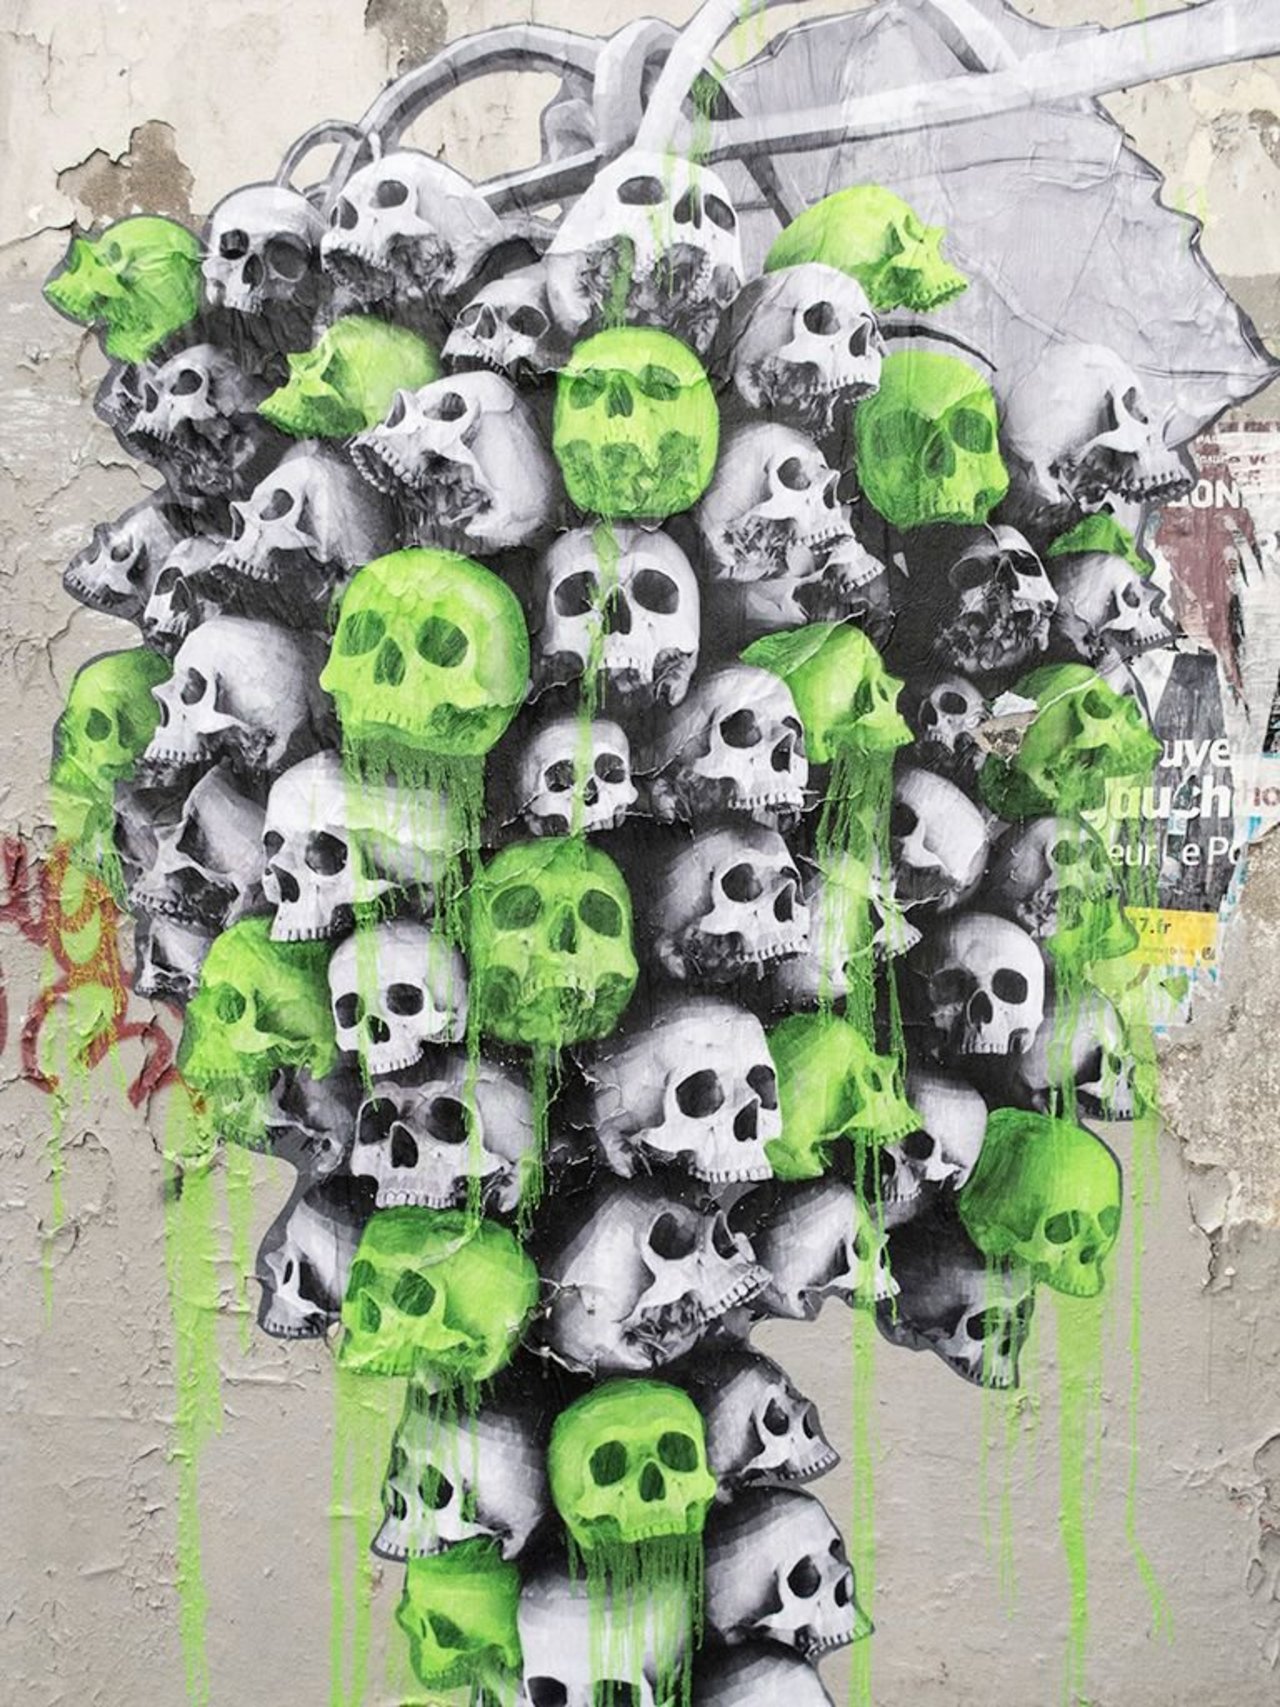 New pieces by Ludo in Paris, France #streetart #mural #graffiti #art https://t.co/awLb92E0rE